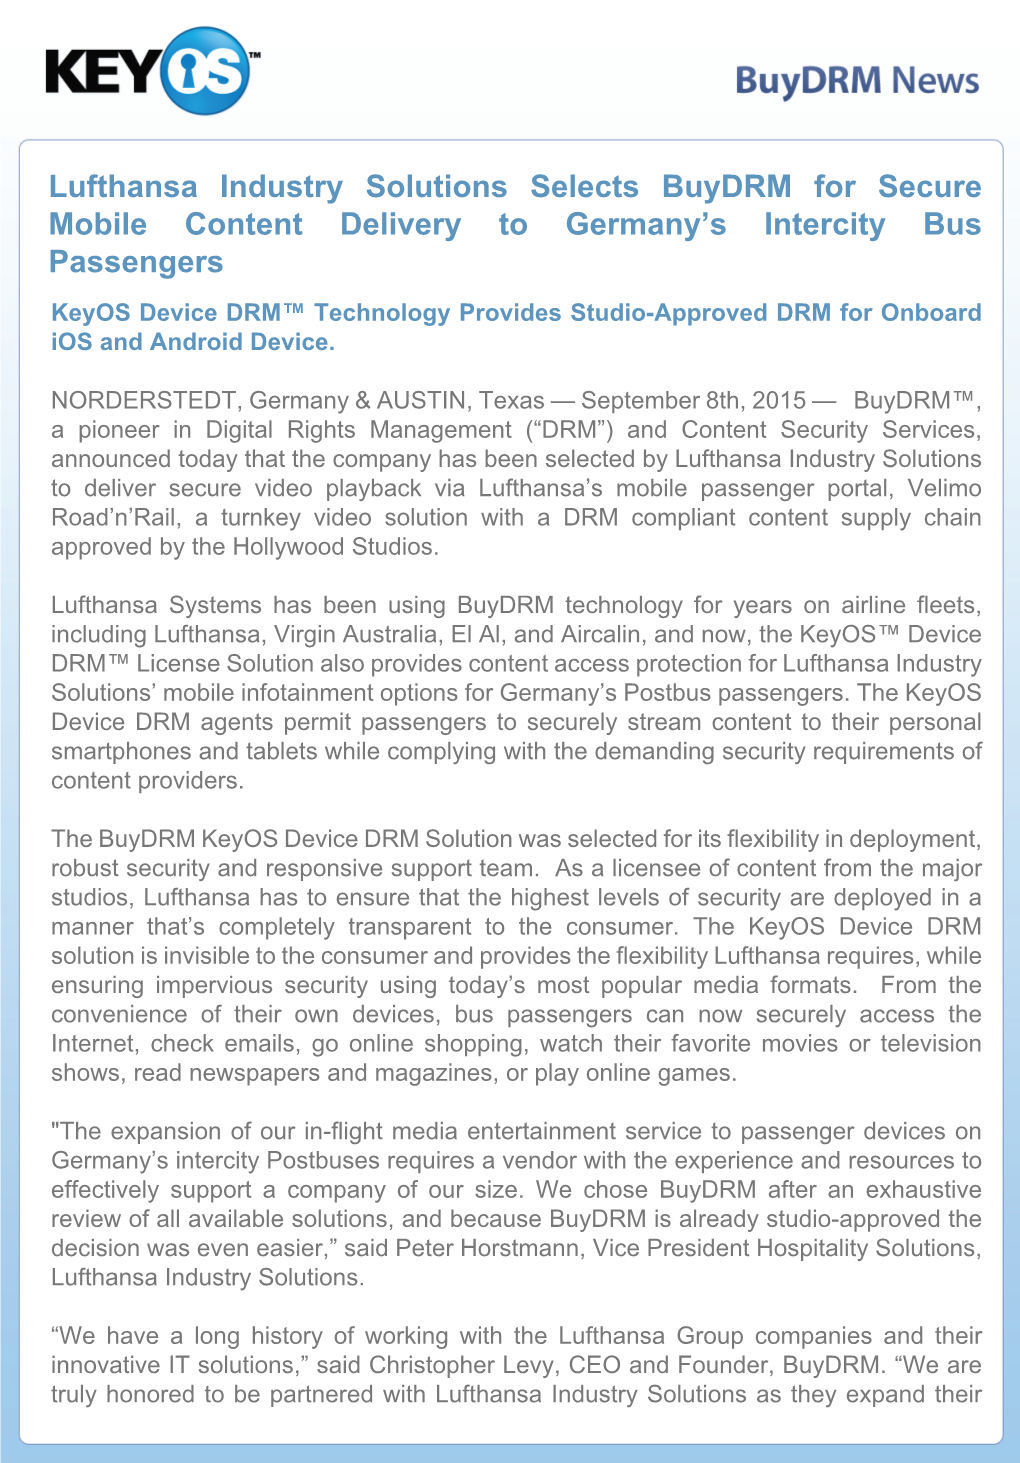 Lufthansa Industry Solutions Selects Buydrm for Secure Mobile